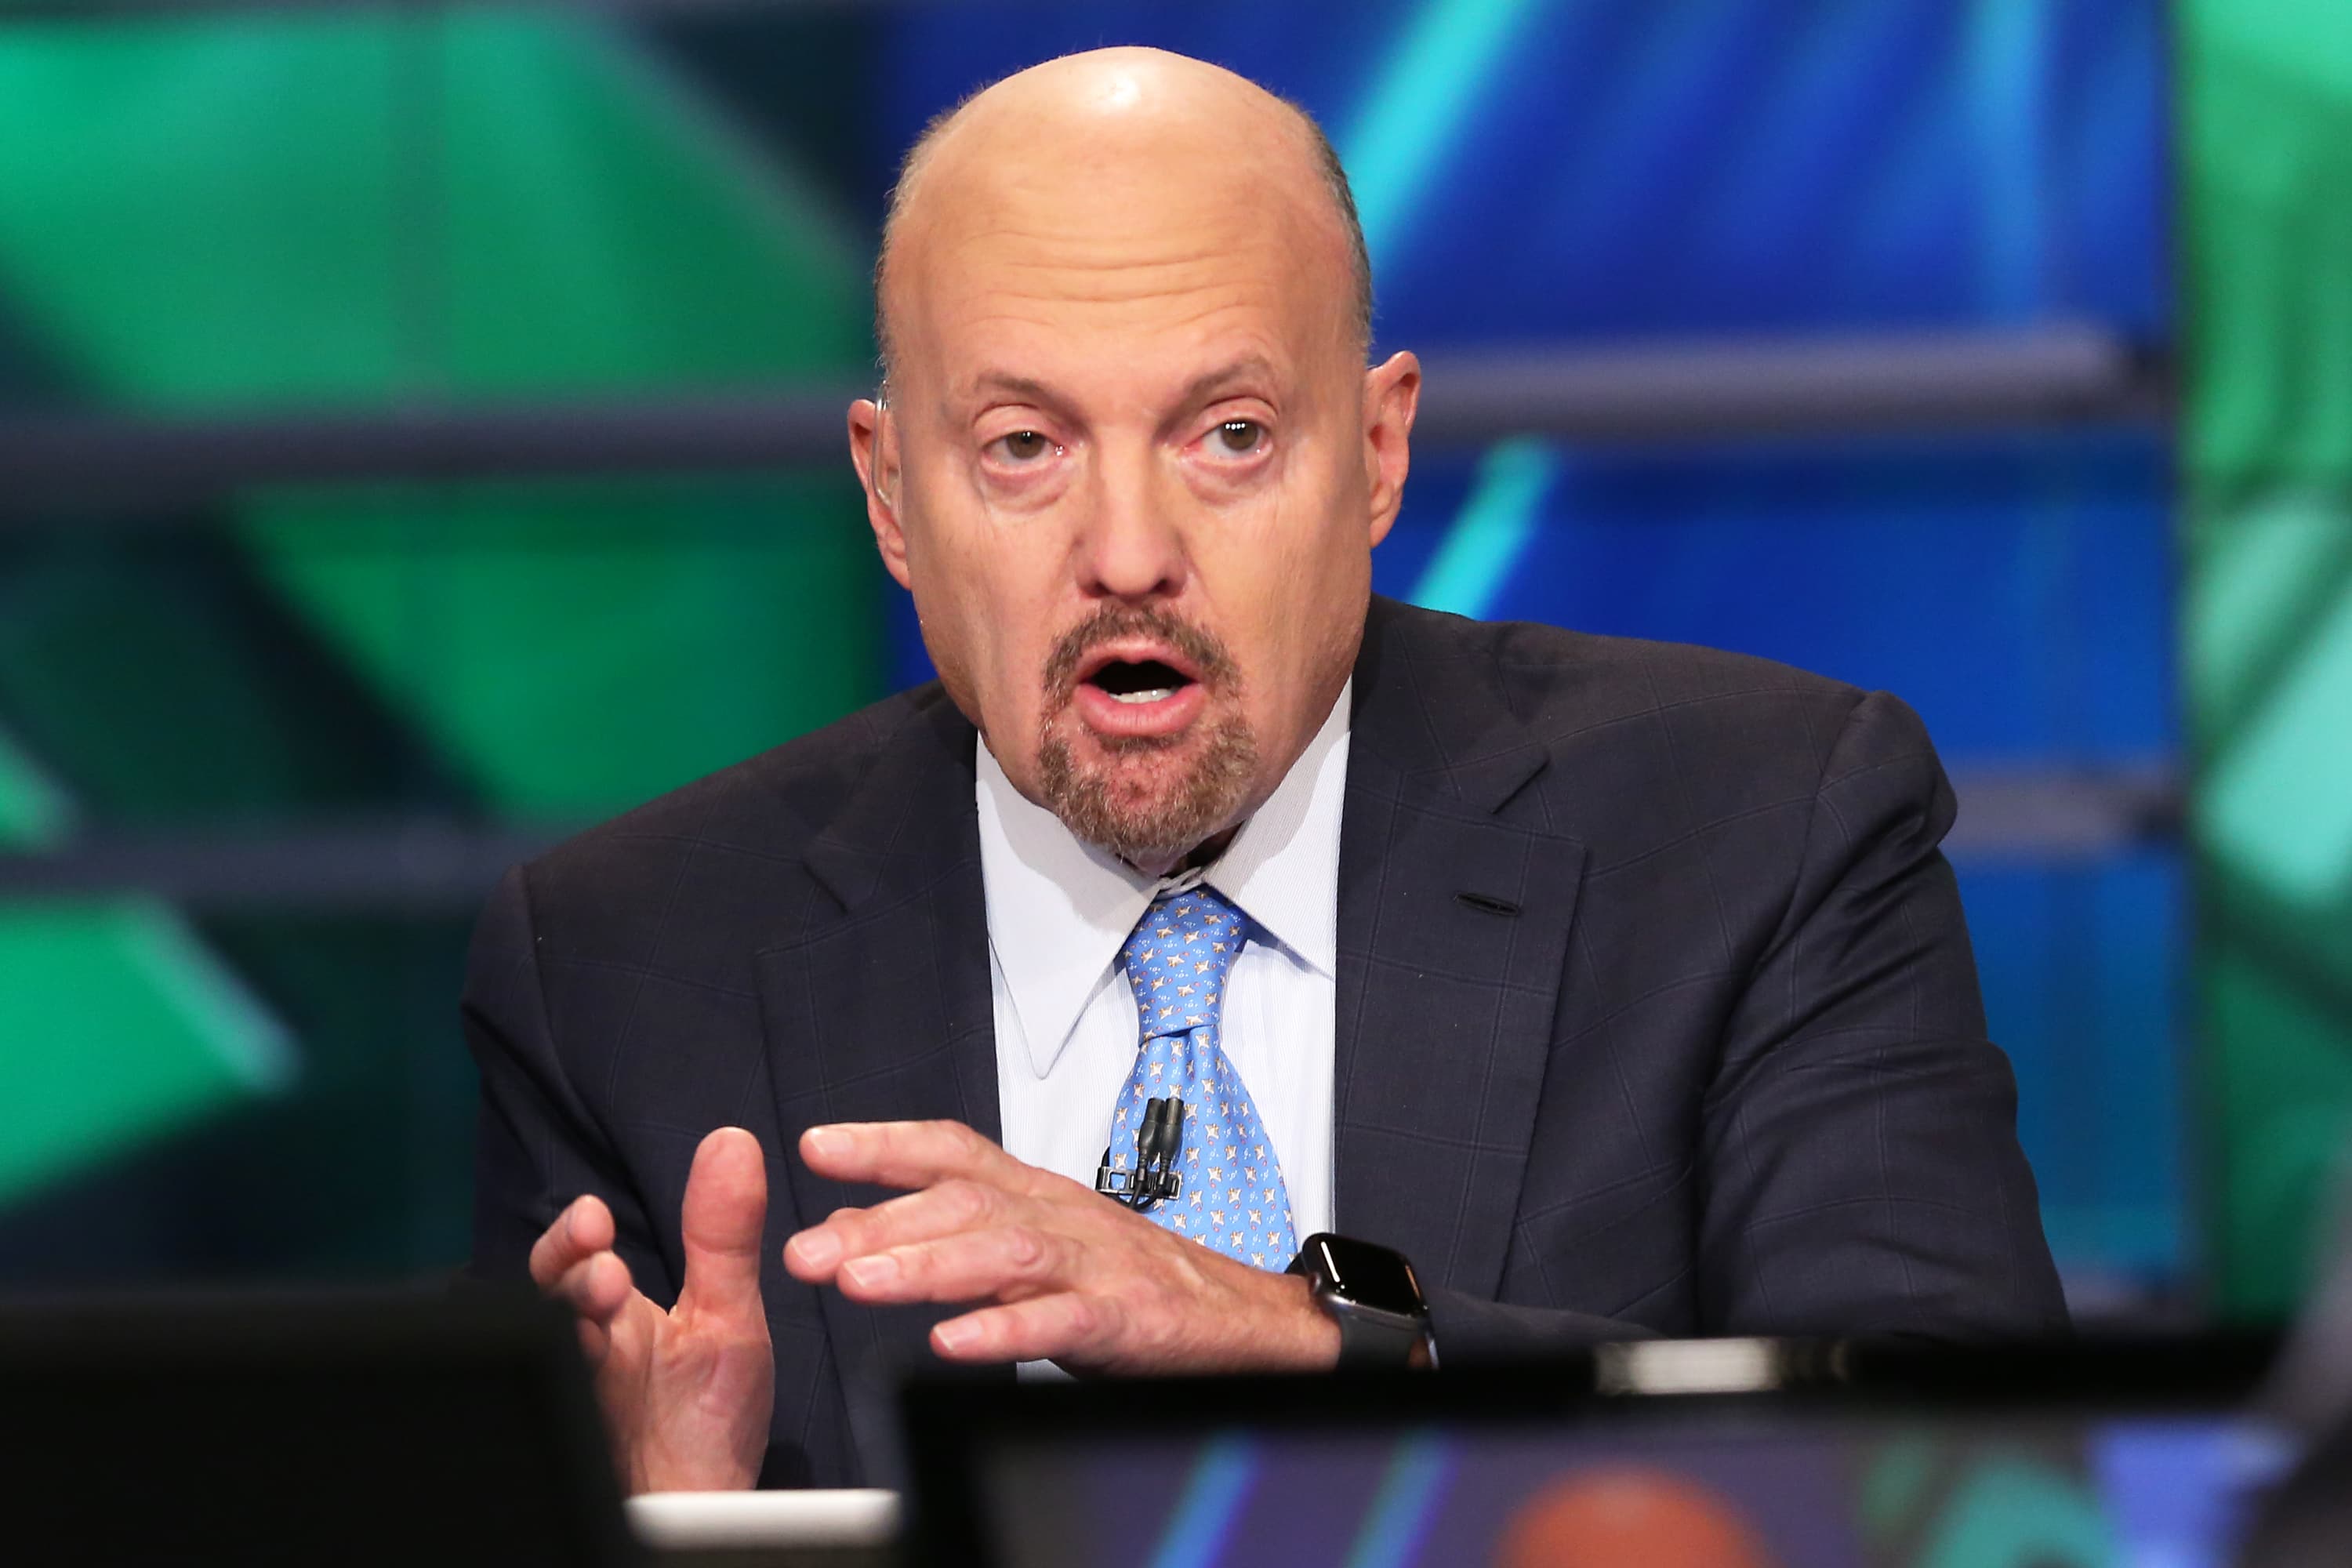 2 takeaways from our daily meeting: Possible Bullpen buys; doubling down on Salesforce, Ford